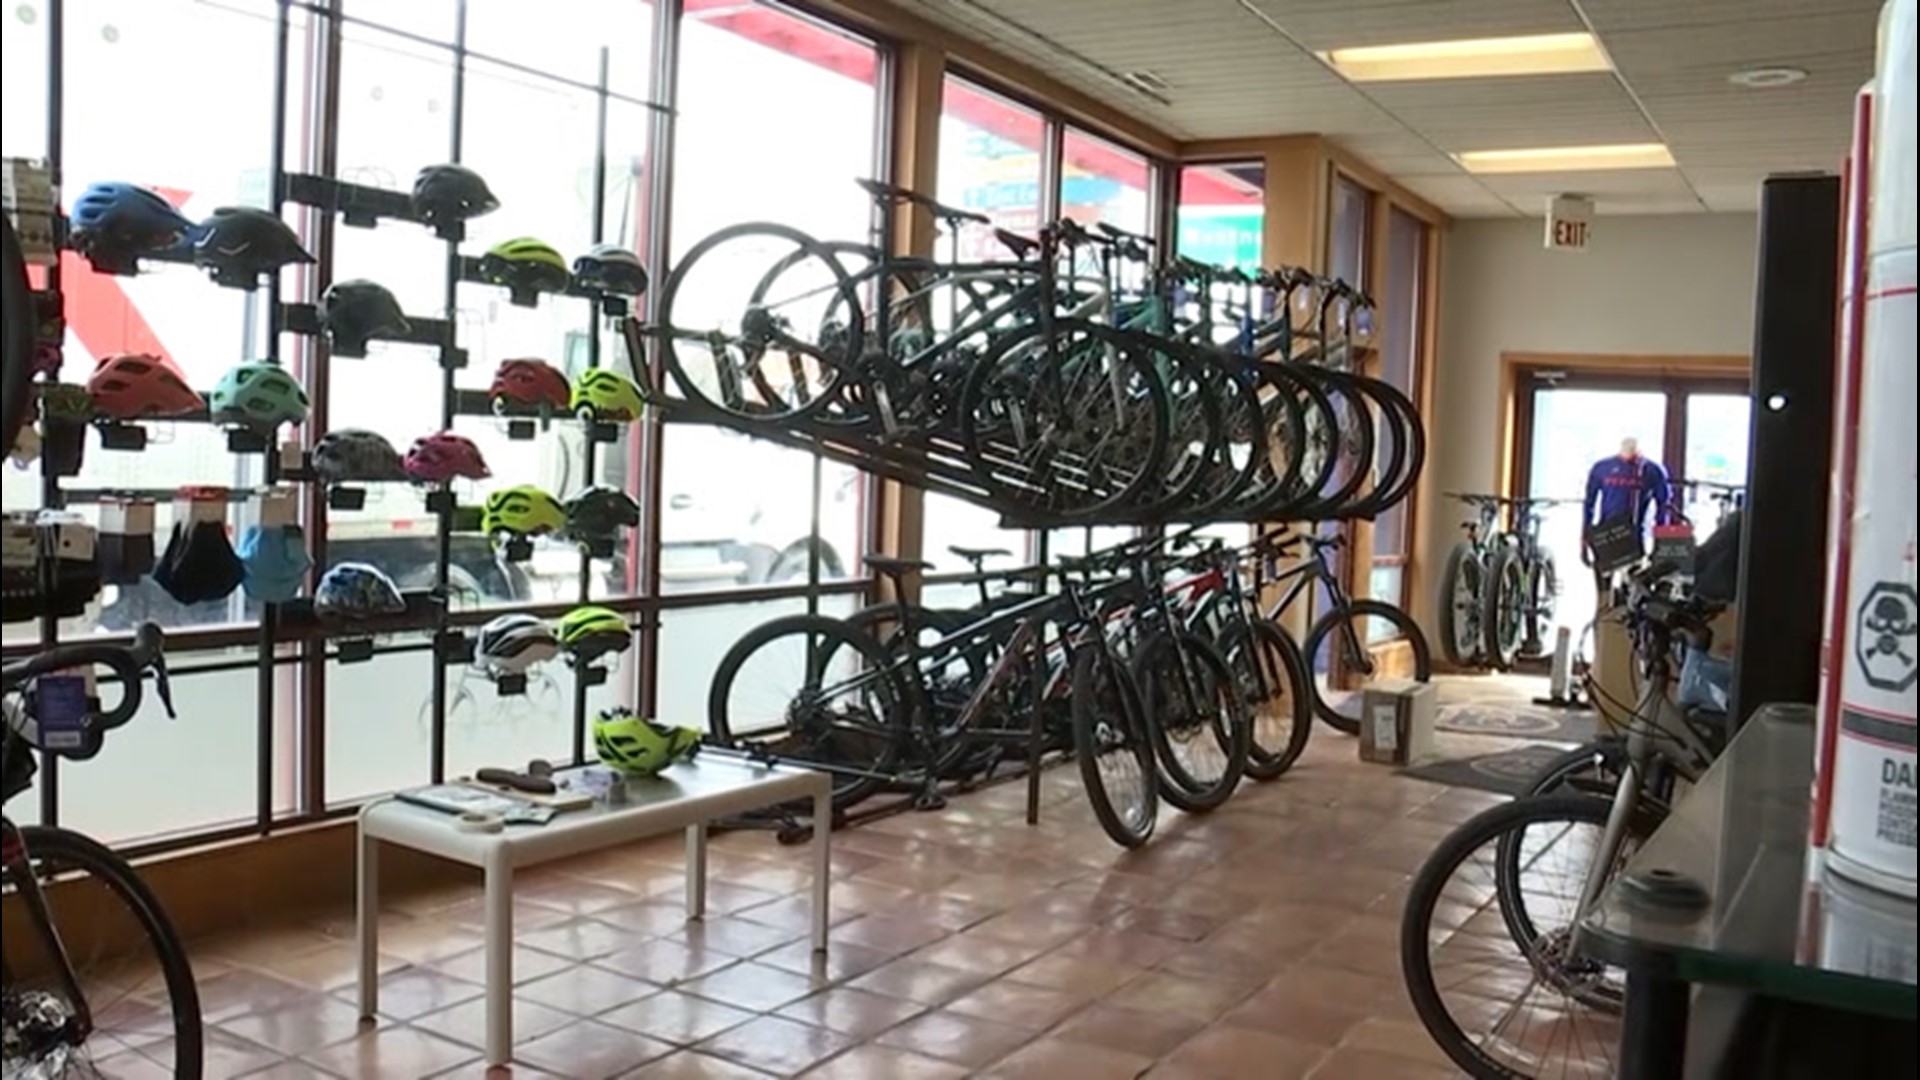 Many Michigan bike shops had a drastic upturn in business in the weeks leading up to the statewide stay-at-home measures to combat Coronavirus.